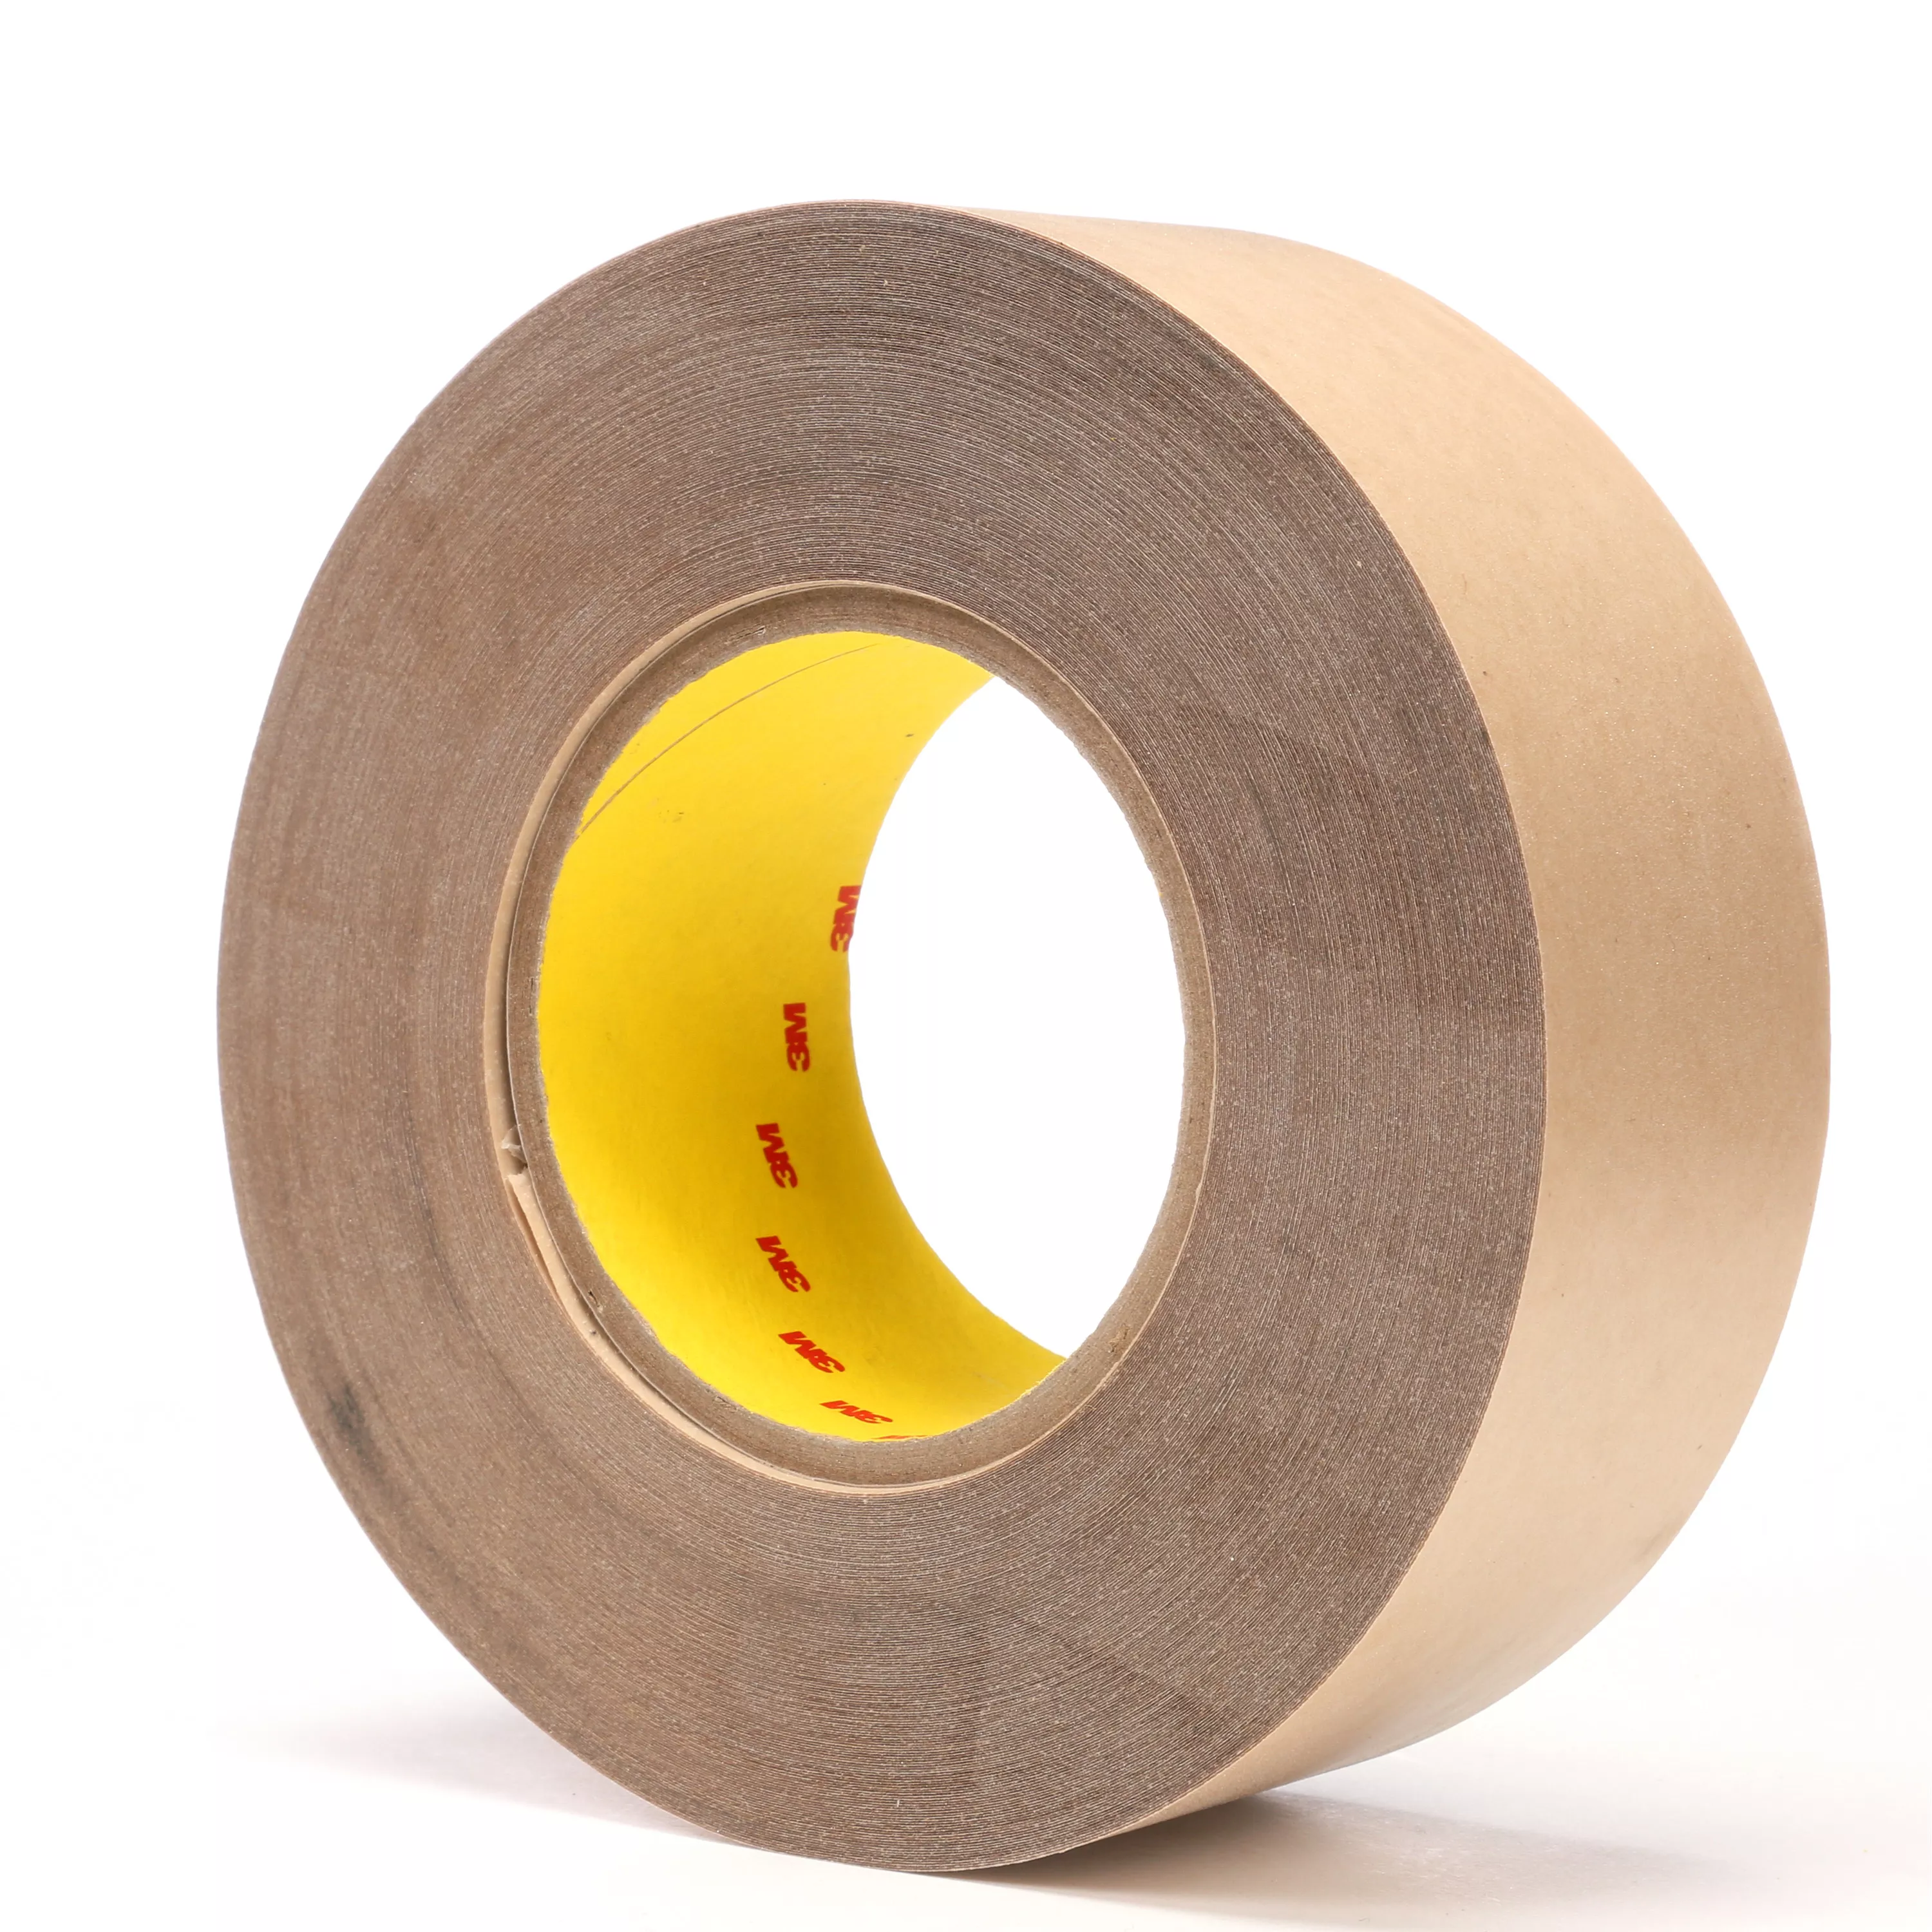 3M™ Adhesive Transfer Tape 9485PC, Clear, 2 in x 60 yd, 5 mil, 24
Roll/Case